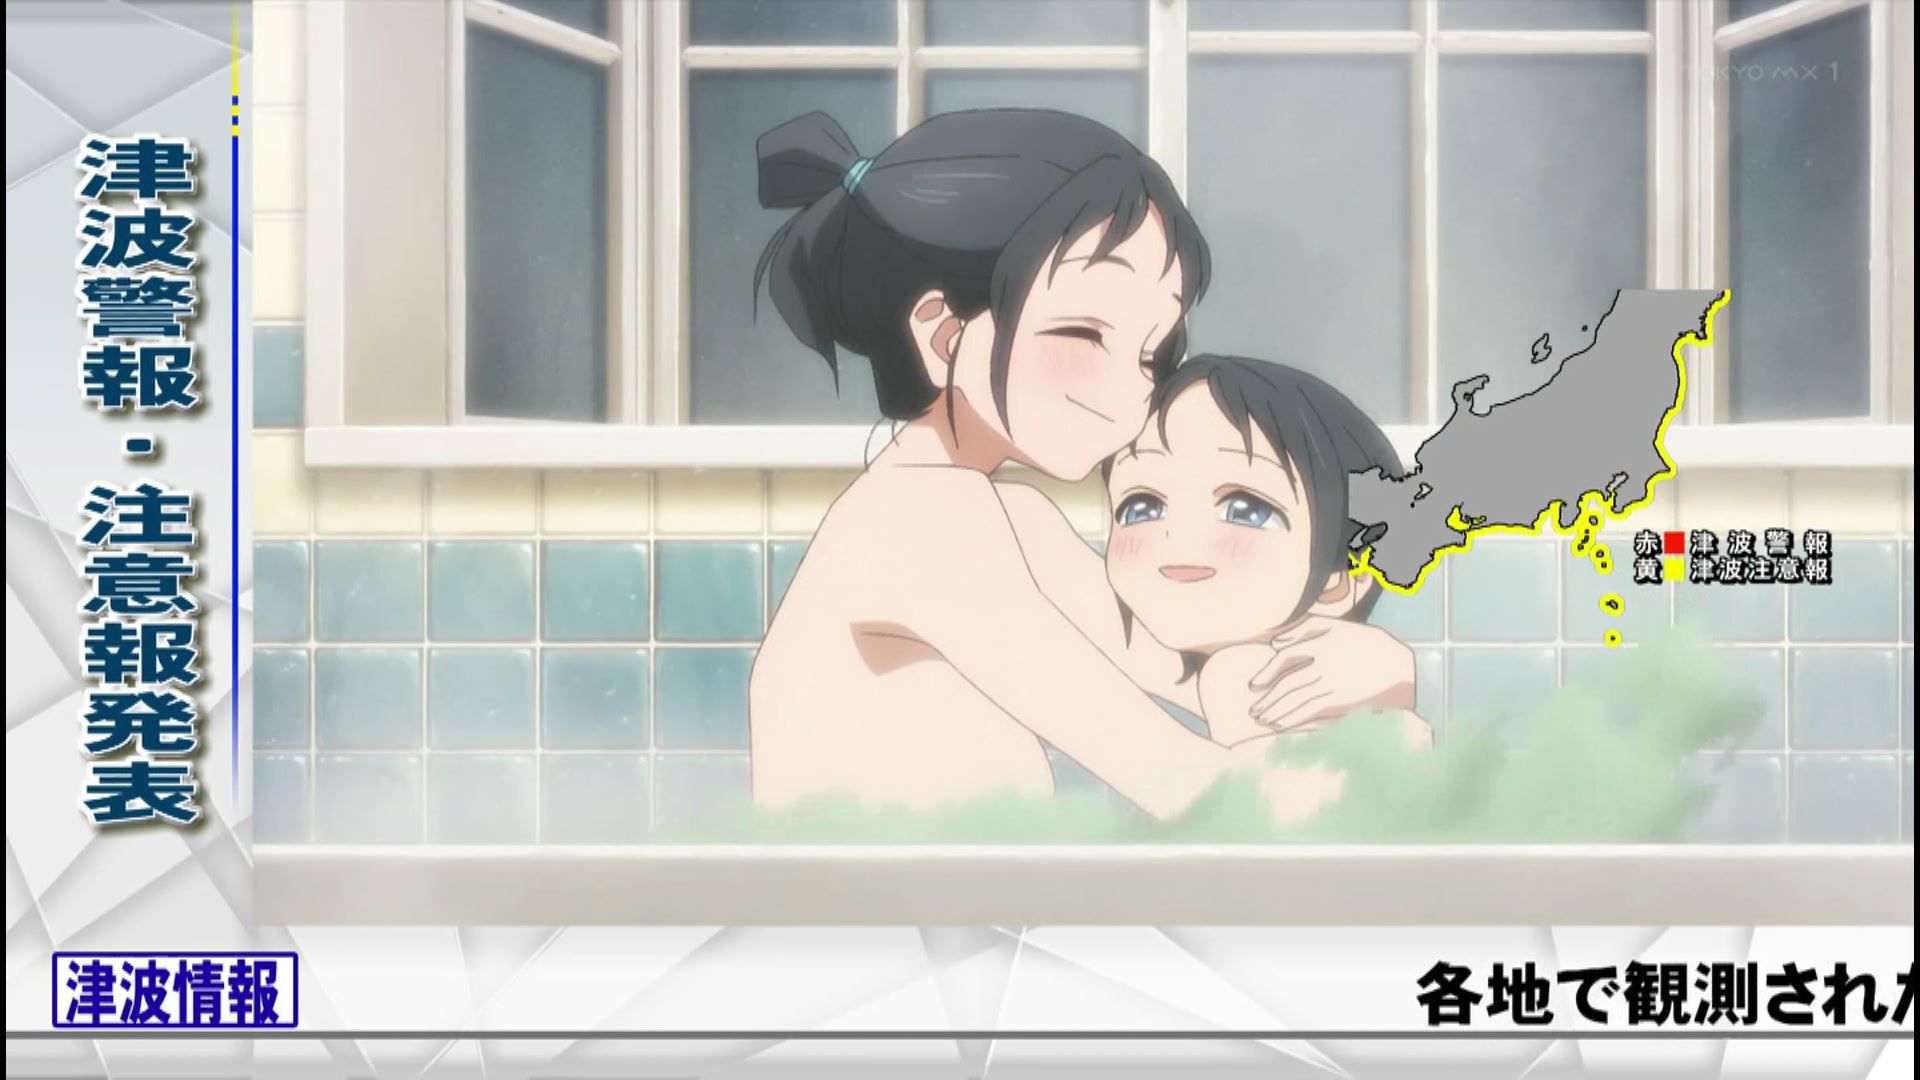 In the anime "Tomorrow-chan's Sailor Suit" episode 2, the girl's erotic bathing scene and the punchy scene 28